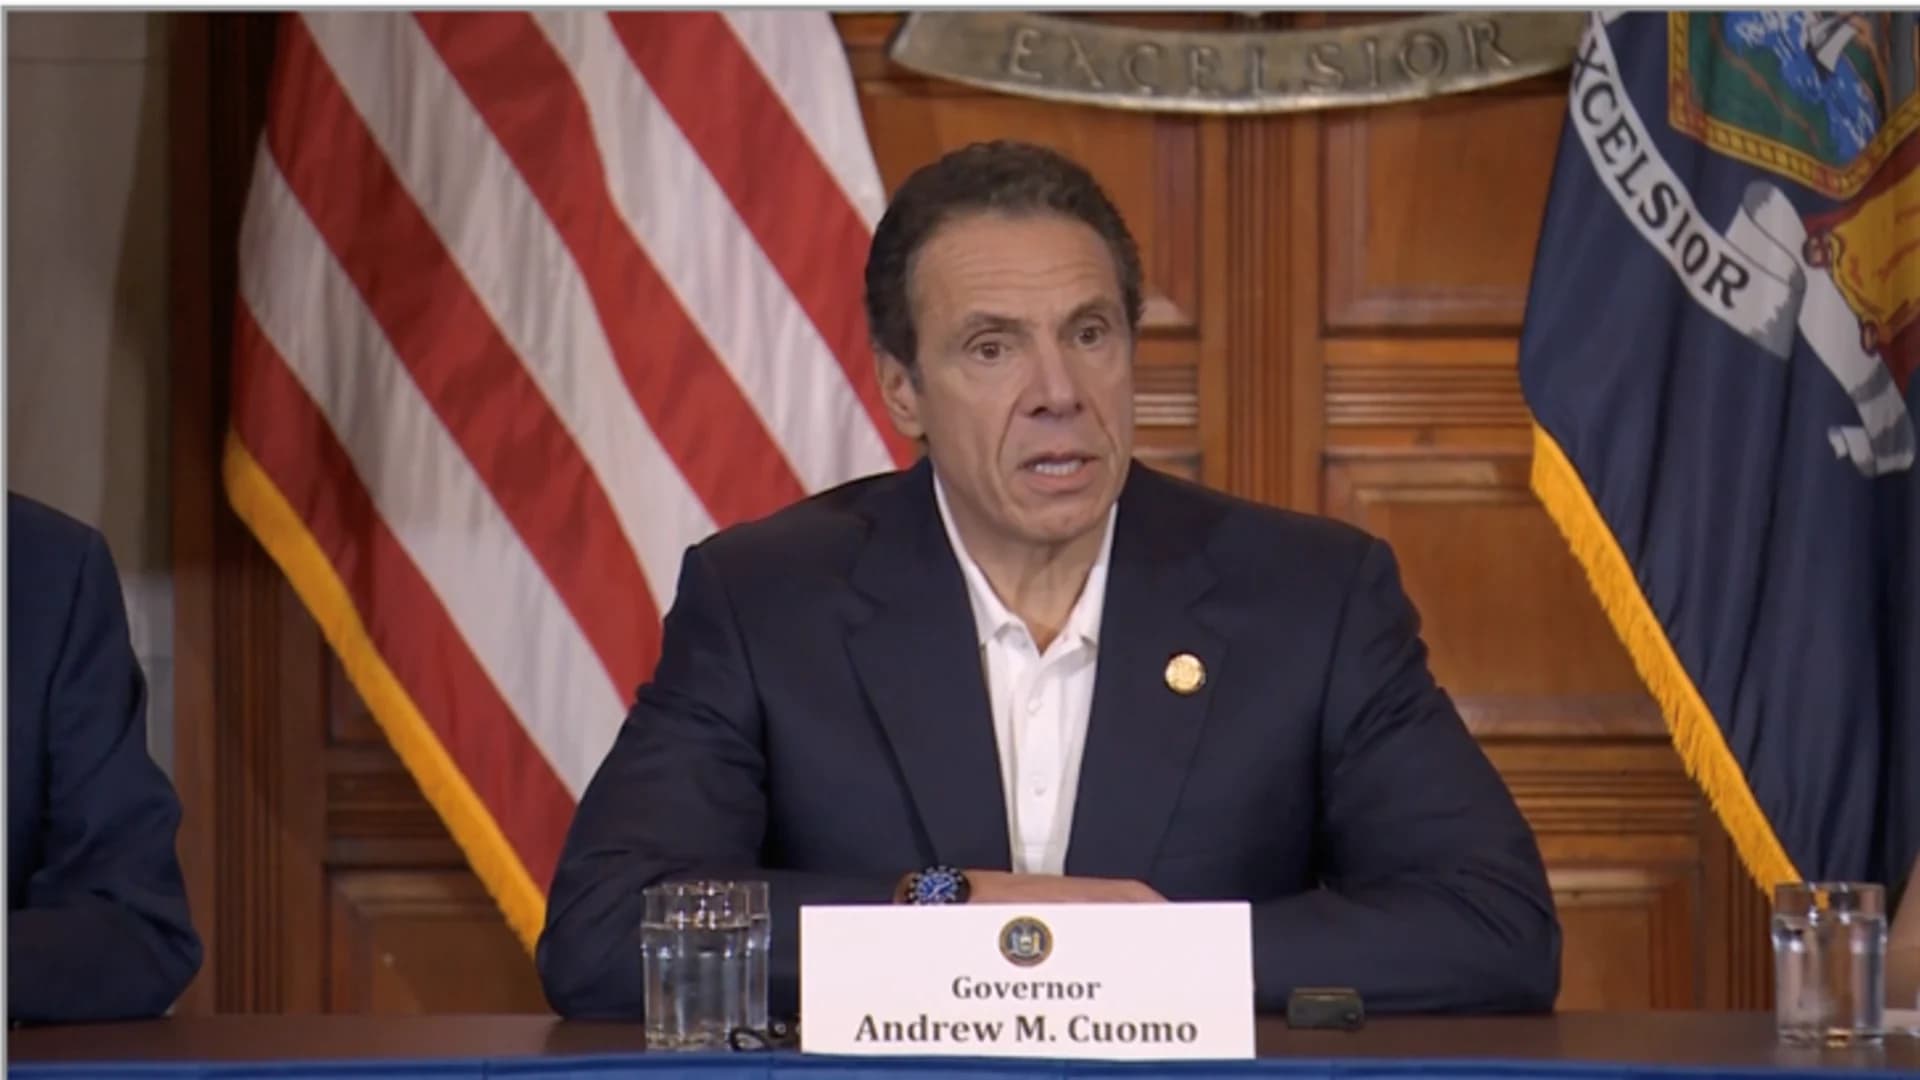 Gov. Cuomo: 75% of workforce must now work from home